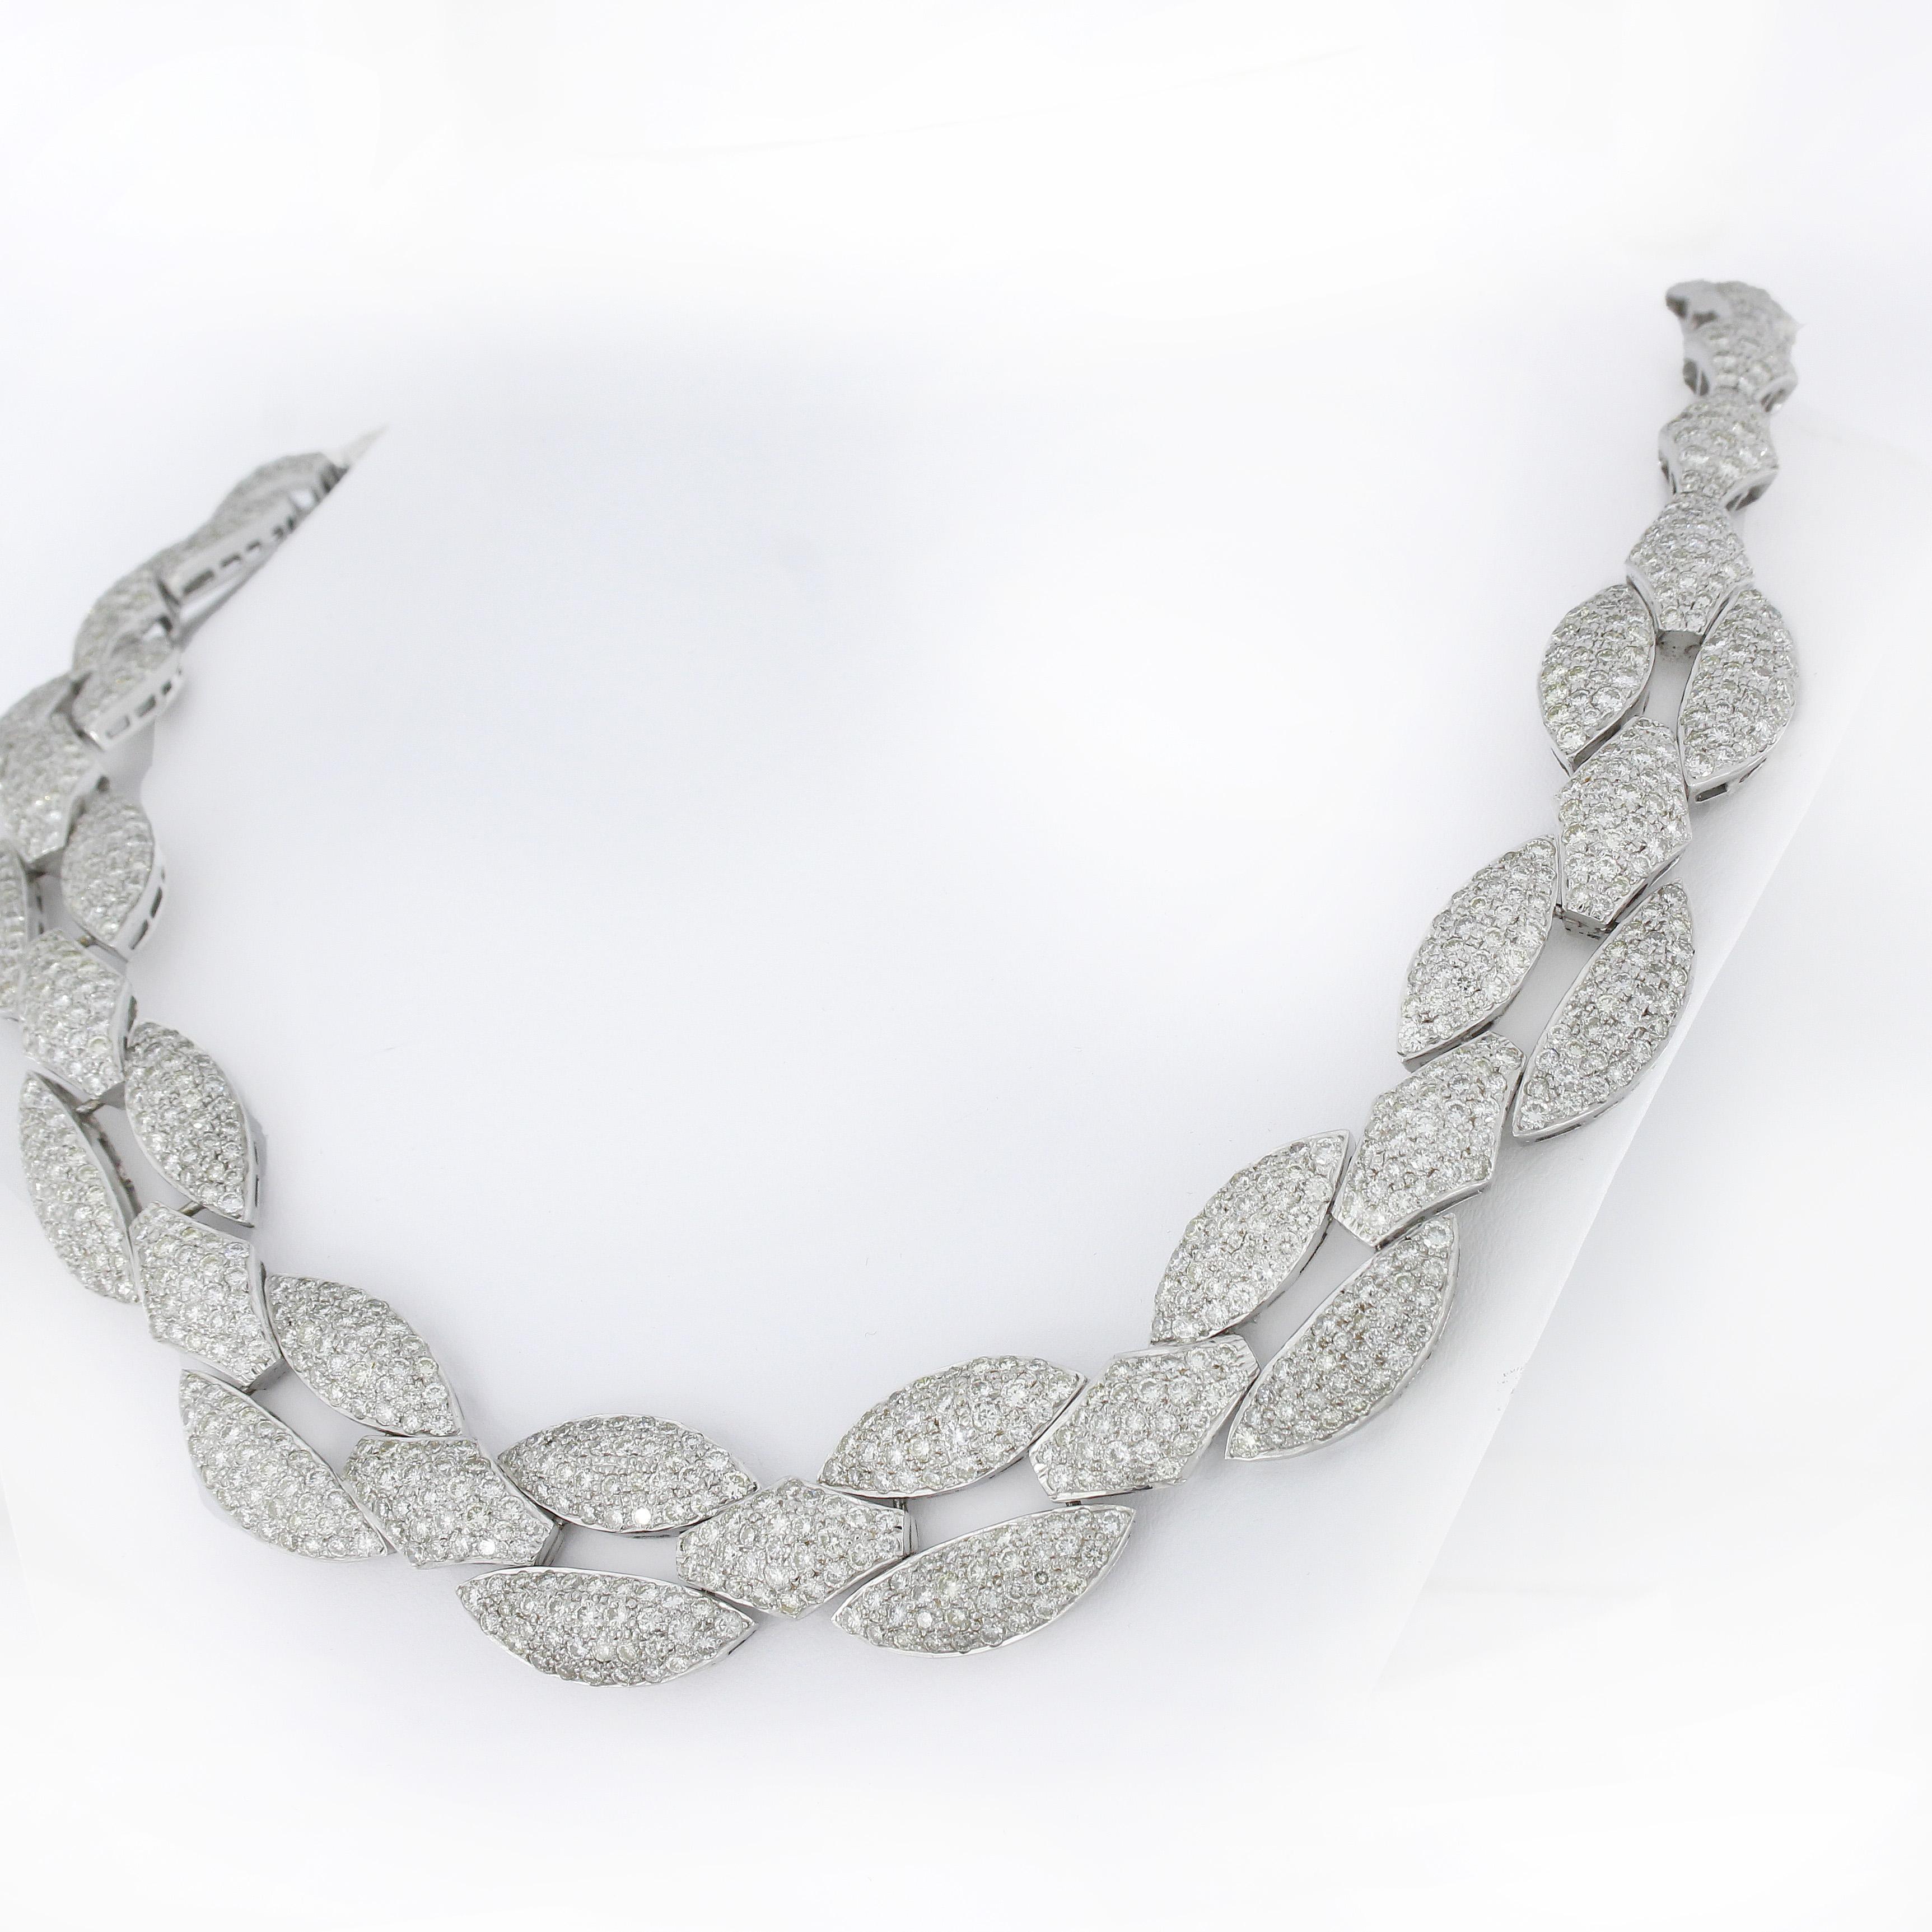 34.6 ct. Diamond Bracelet & Necklace White Gold Jewelry Set In Good Condition For Sale In Berlin, DE